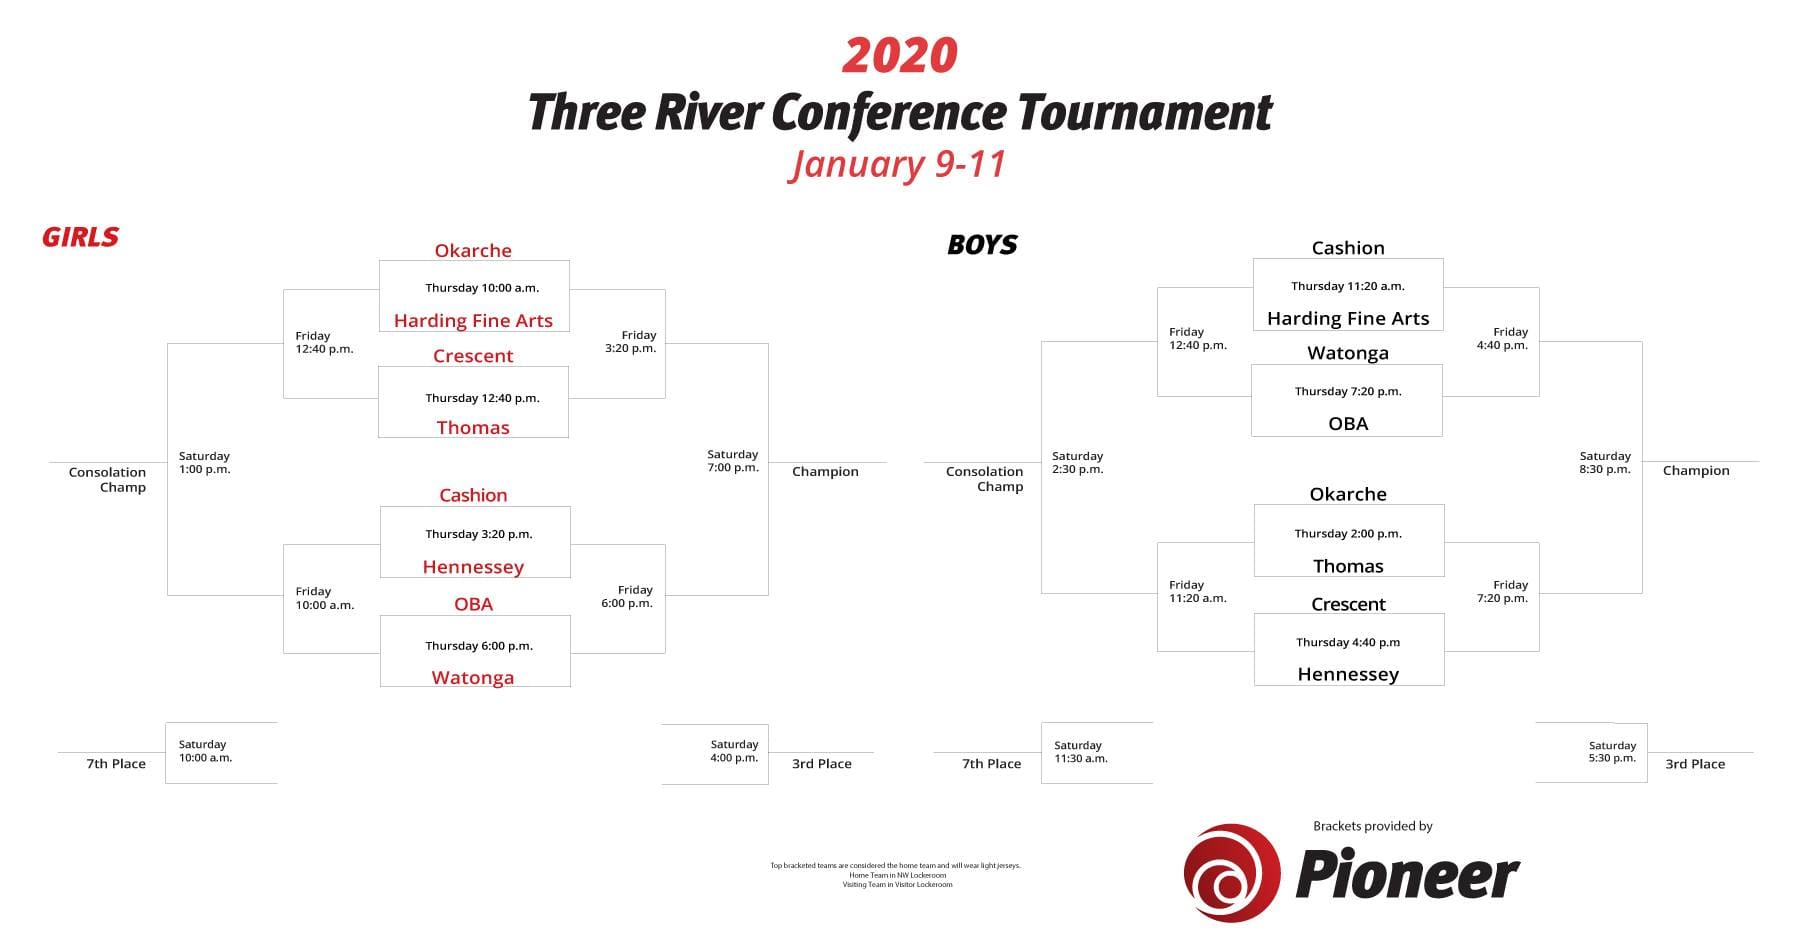 THREE RIVERS CONFERENCE TOURNAMENT